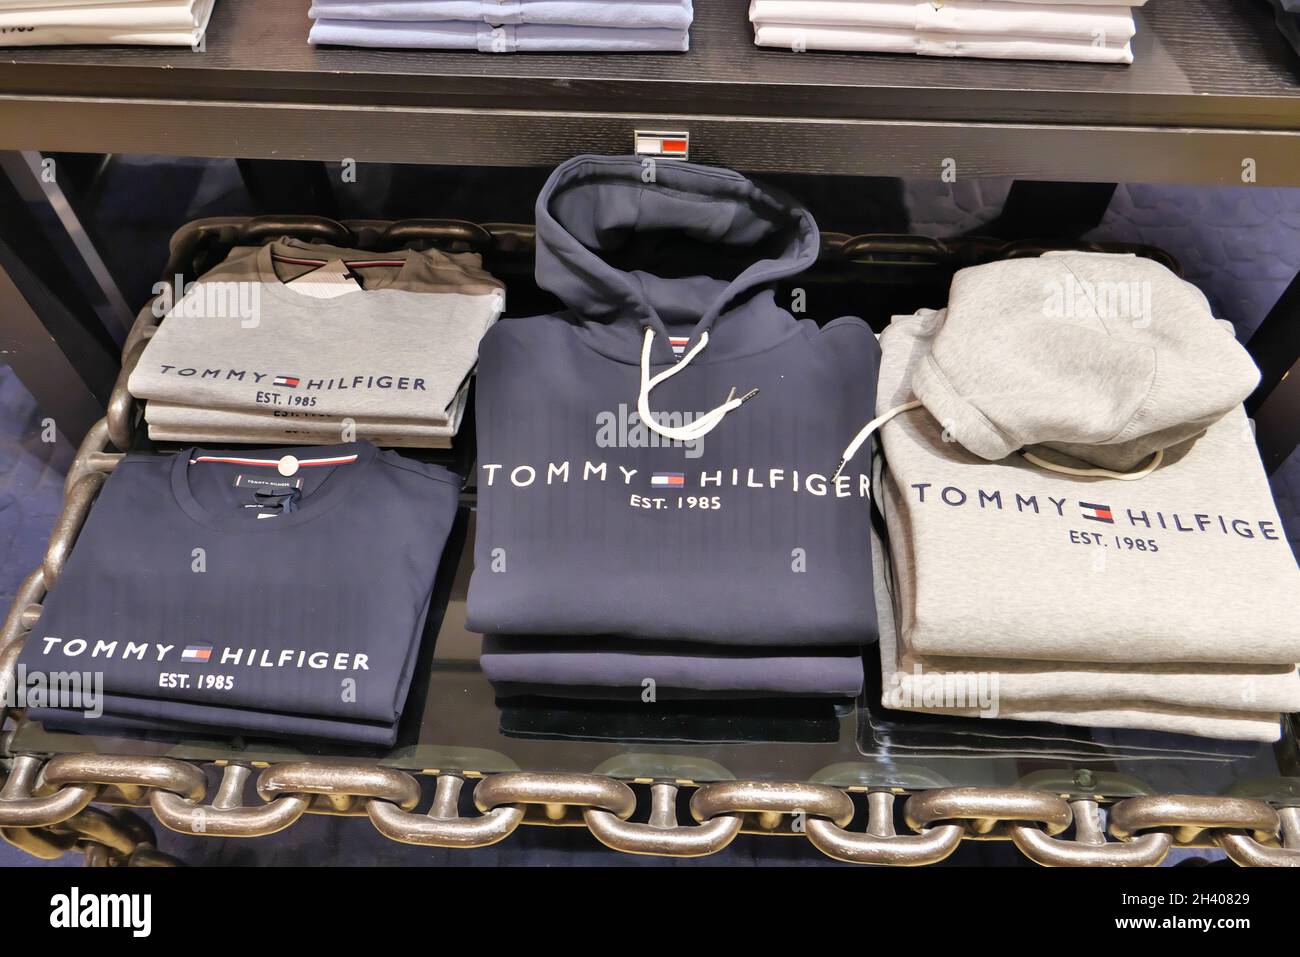 TOMMY HILFIGER CLOTHING ON DISPLAY INSIDE THE FASHION STORE Stock Photo -  Alamy